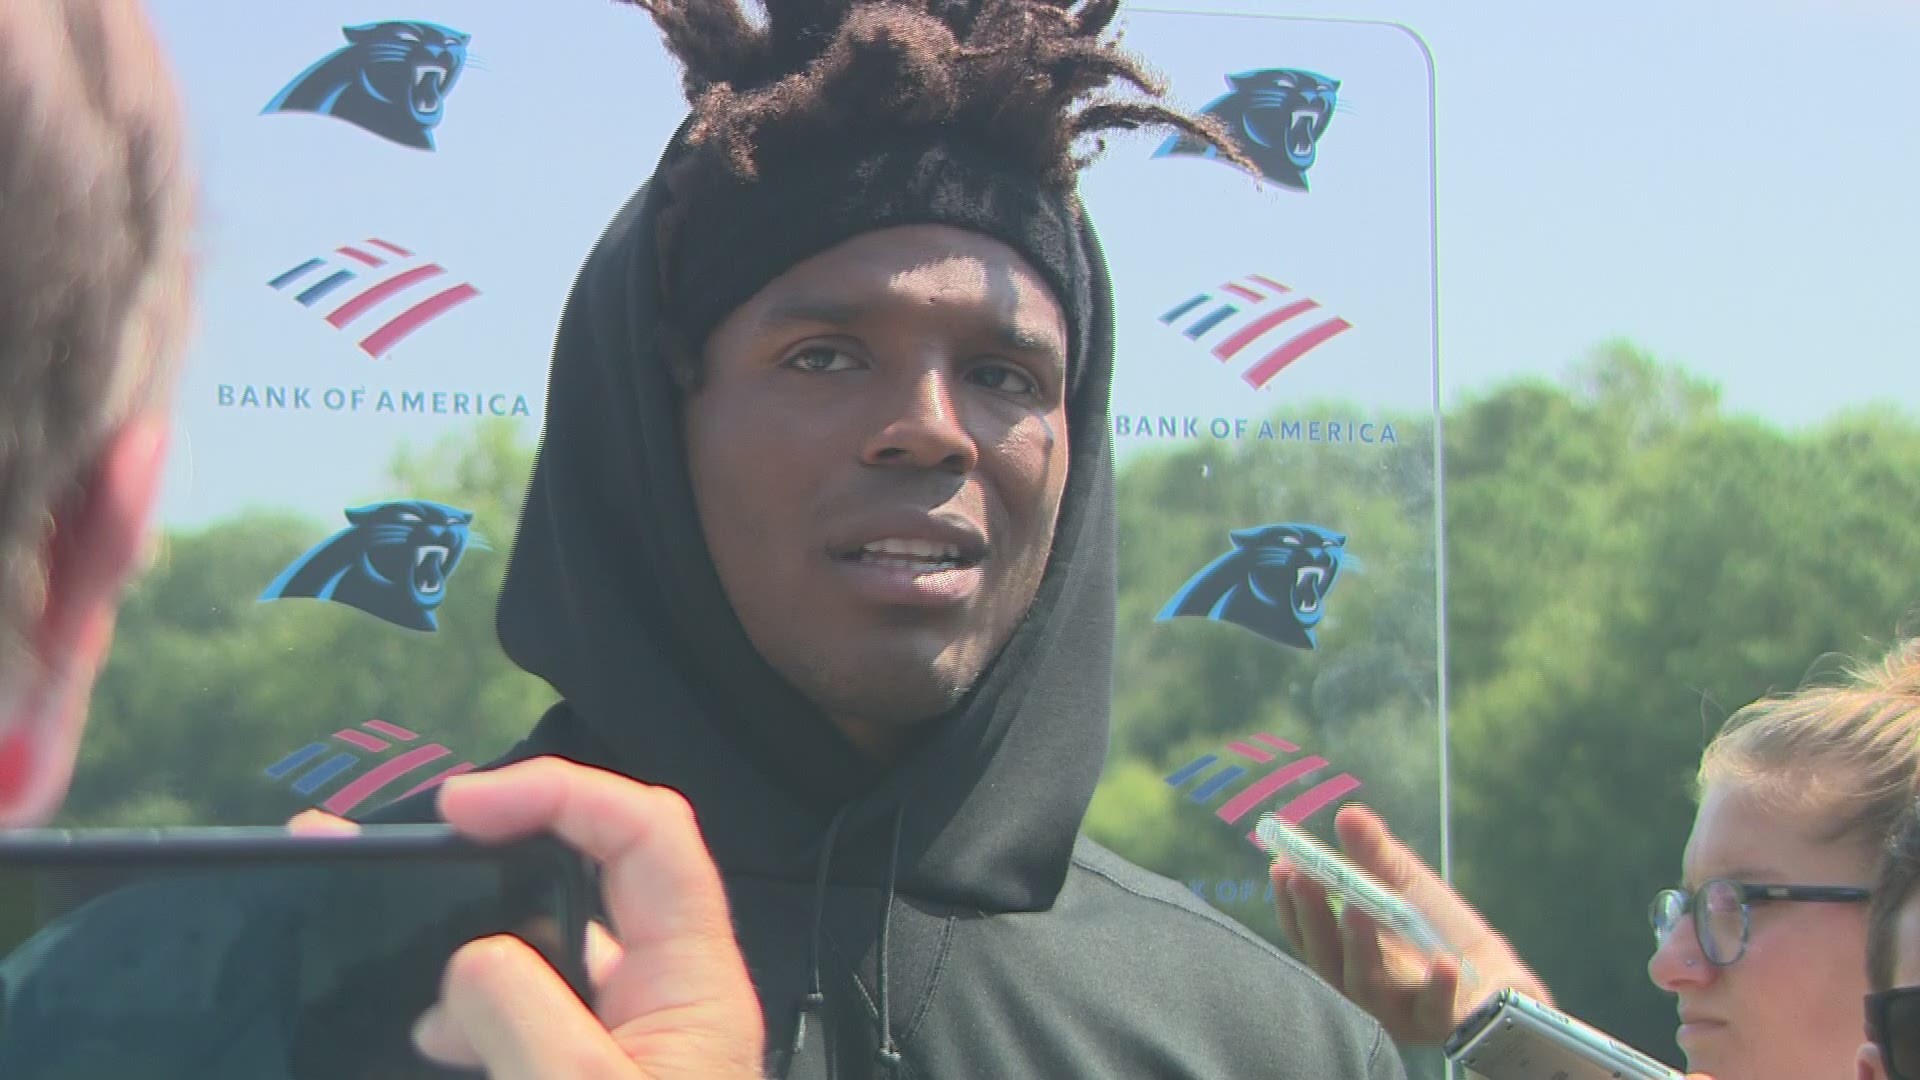 Newton doesn't want people to assume "Cam is back", he said it's all a process to get back to his full potential.